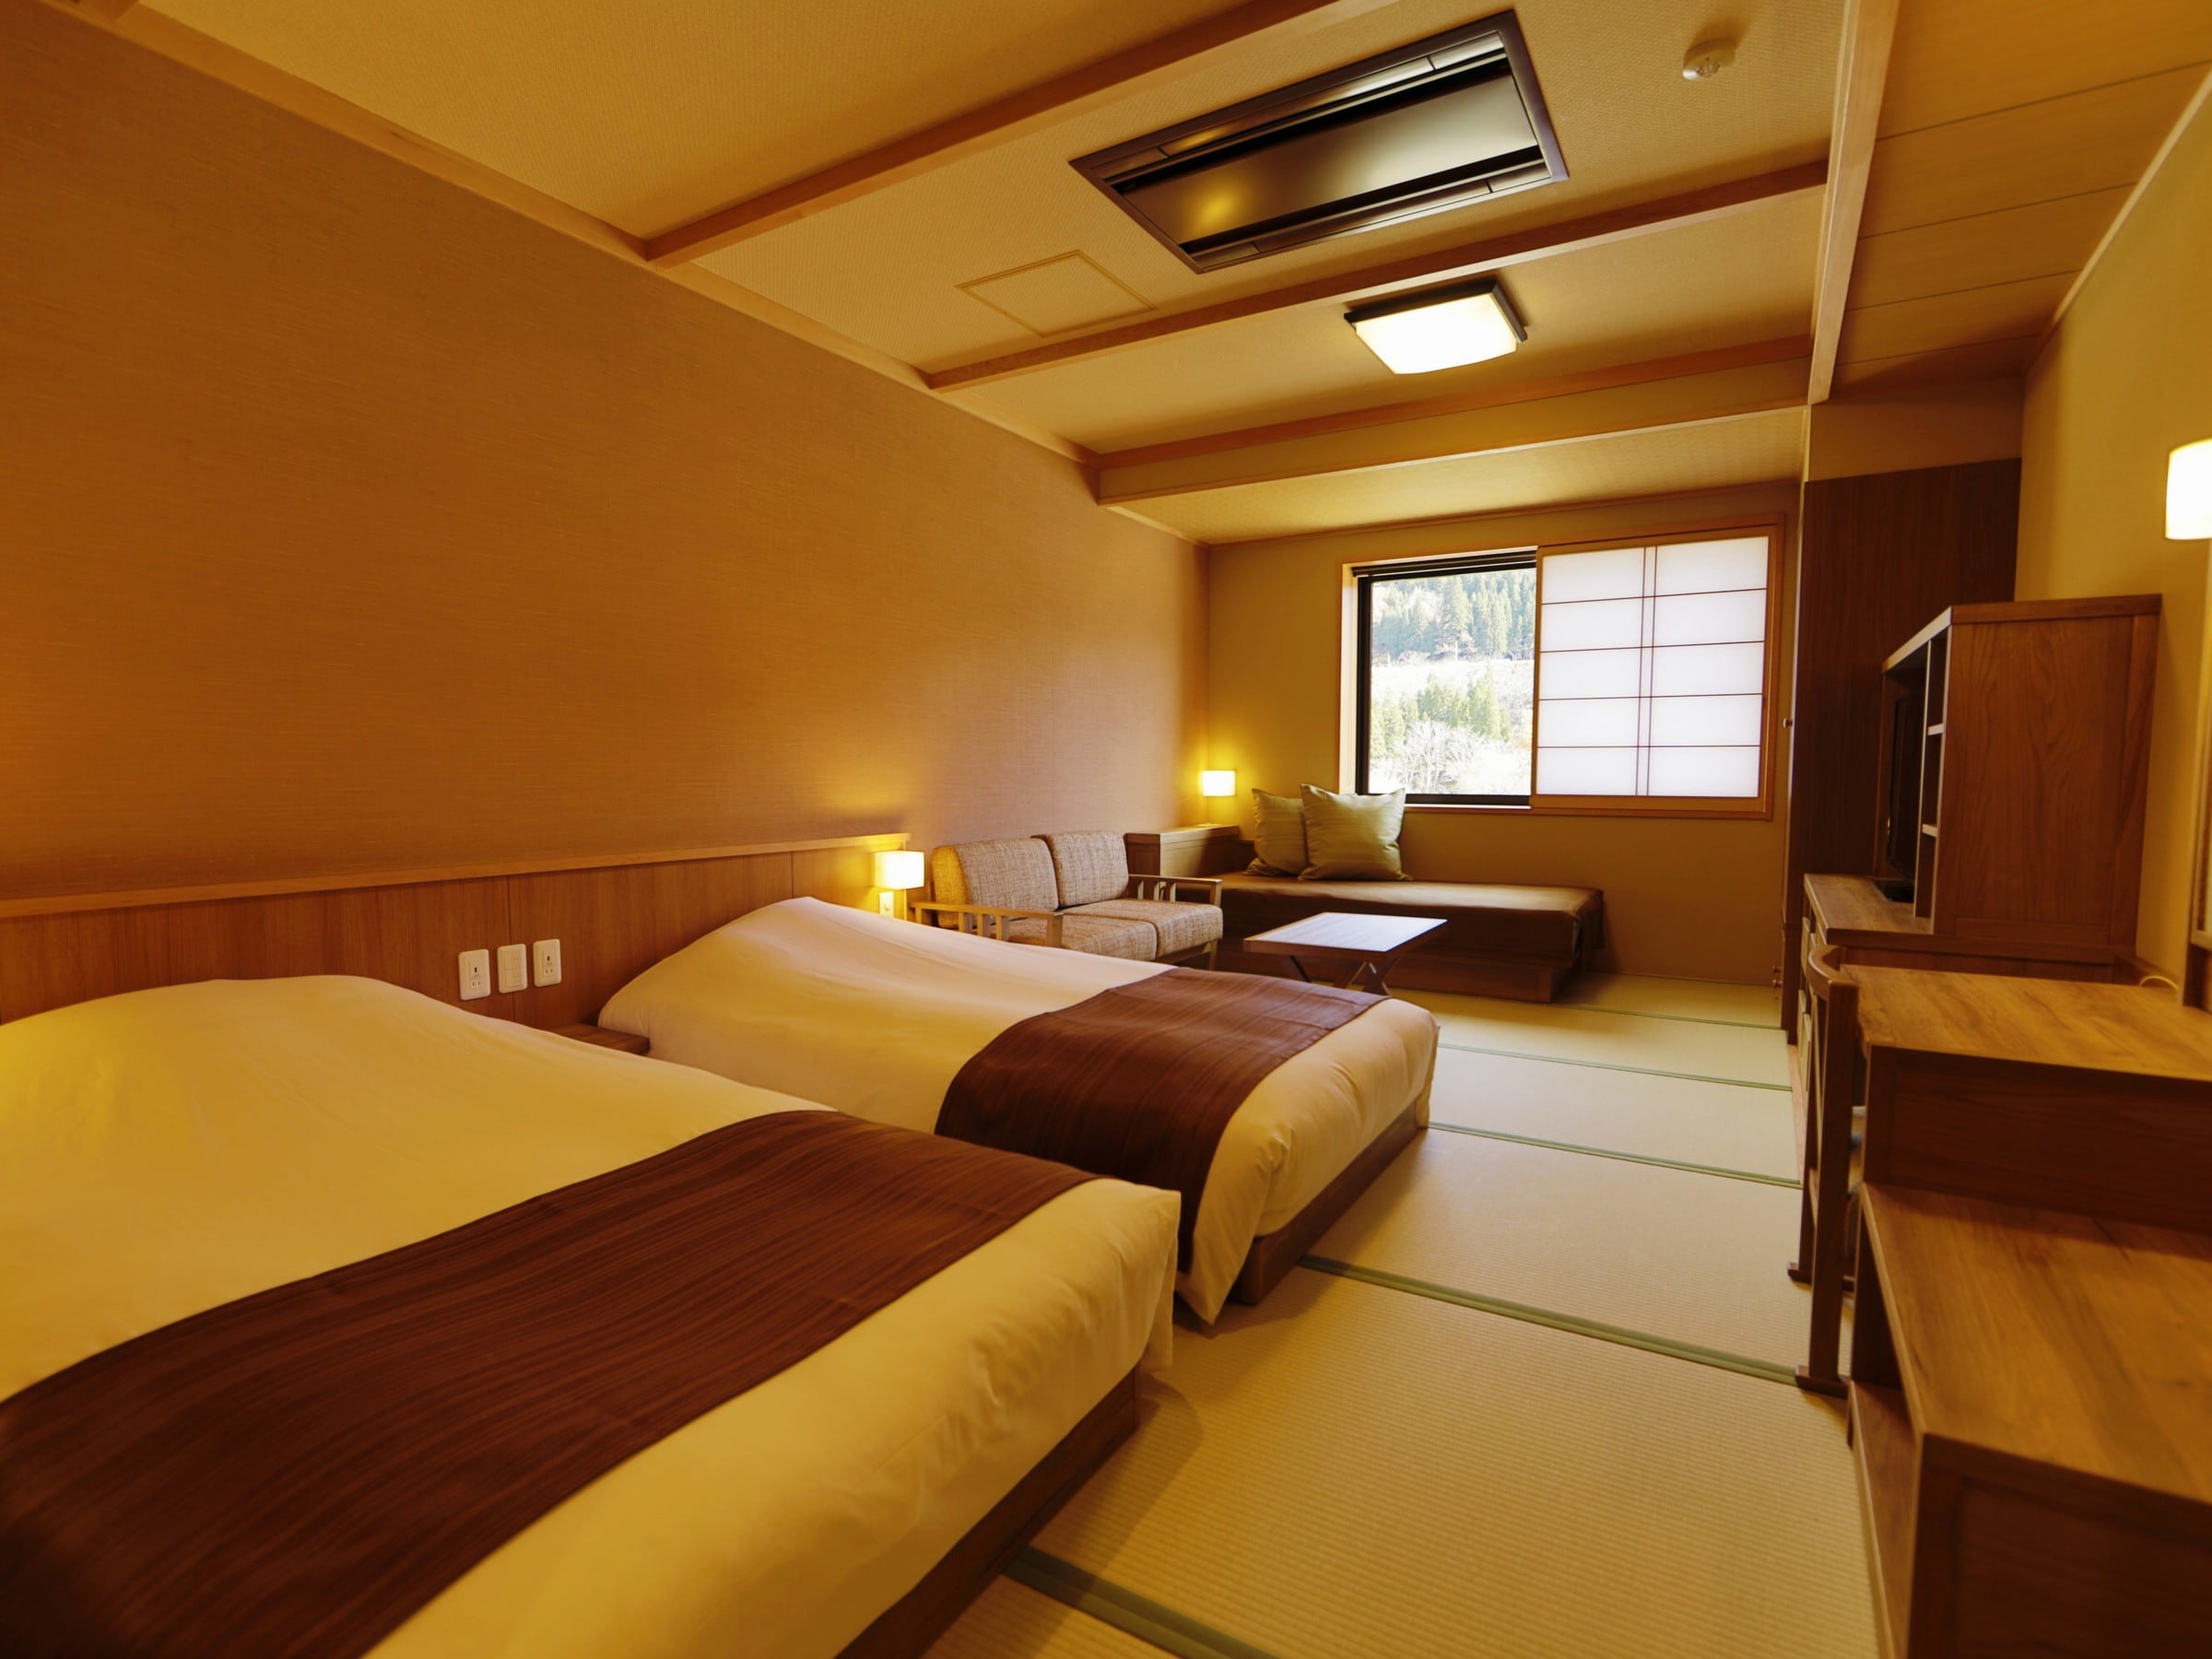 [Guest room] Comfort Twin ◆ 31.1 sqm This is a riverside guest room where you can see the snowy landscape and the fresh green mountains from the window every season.